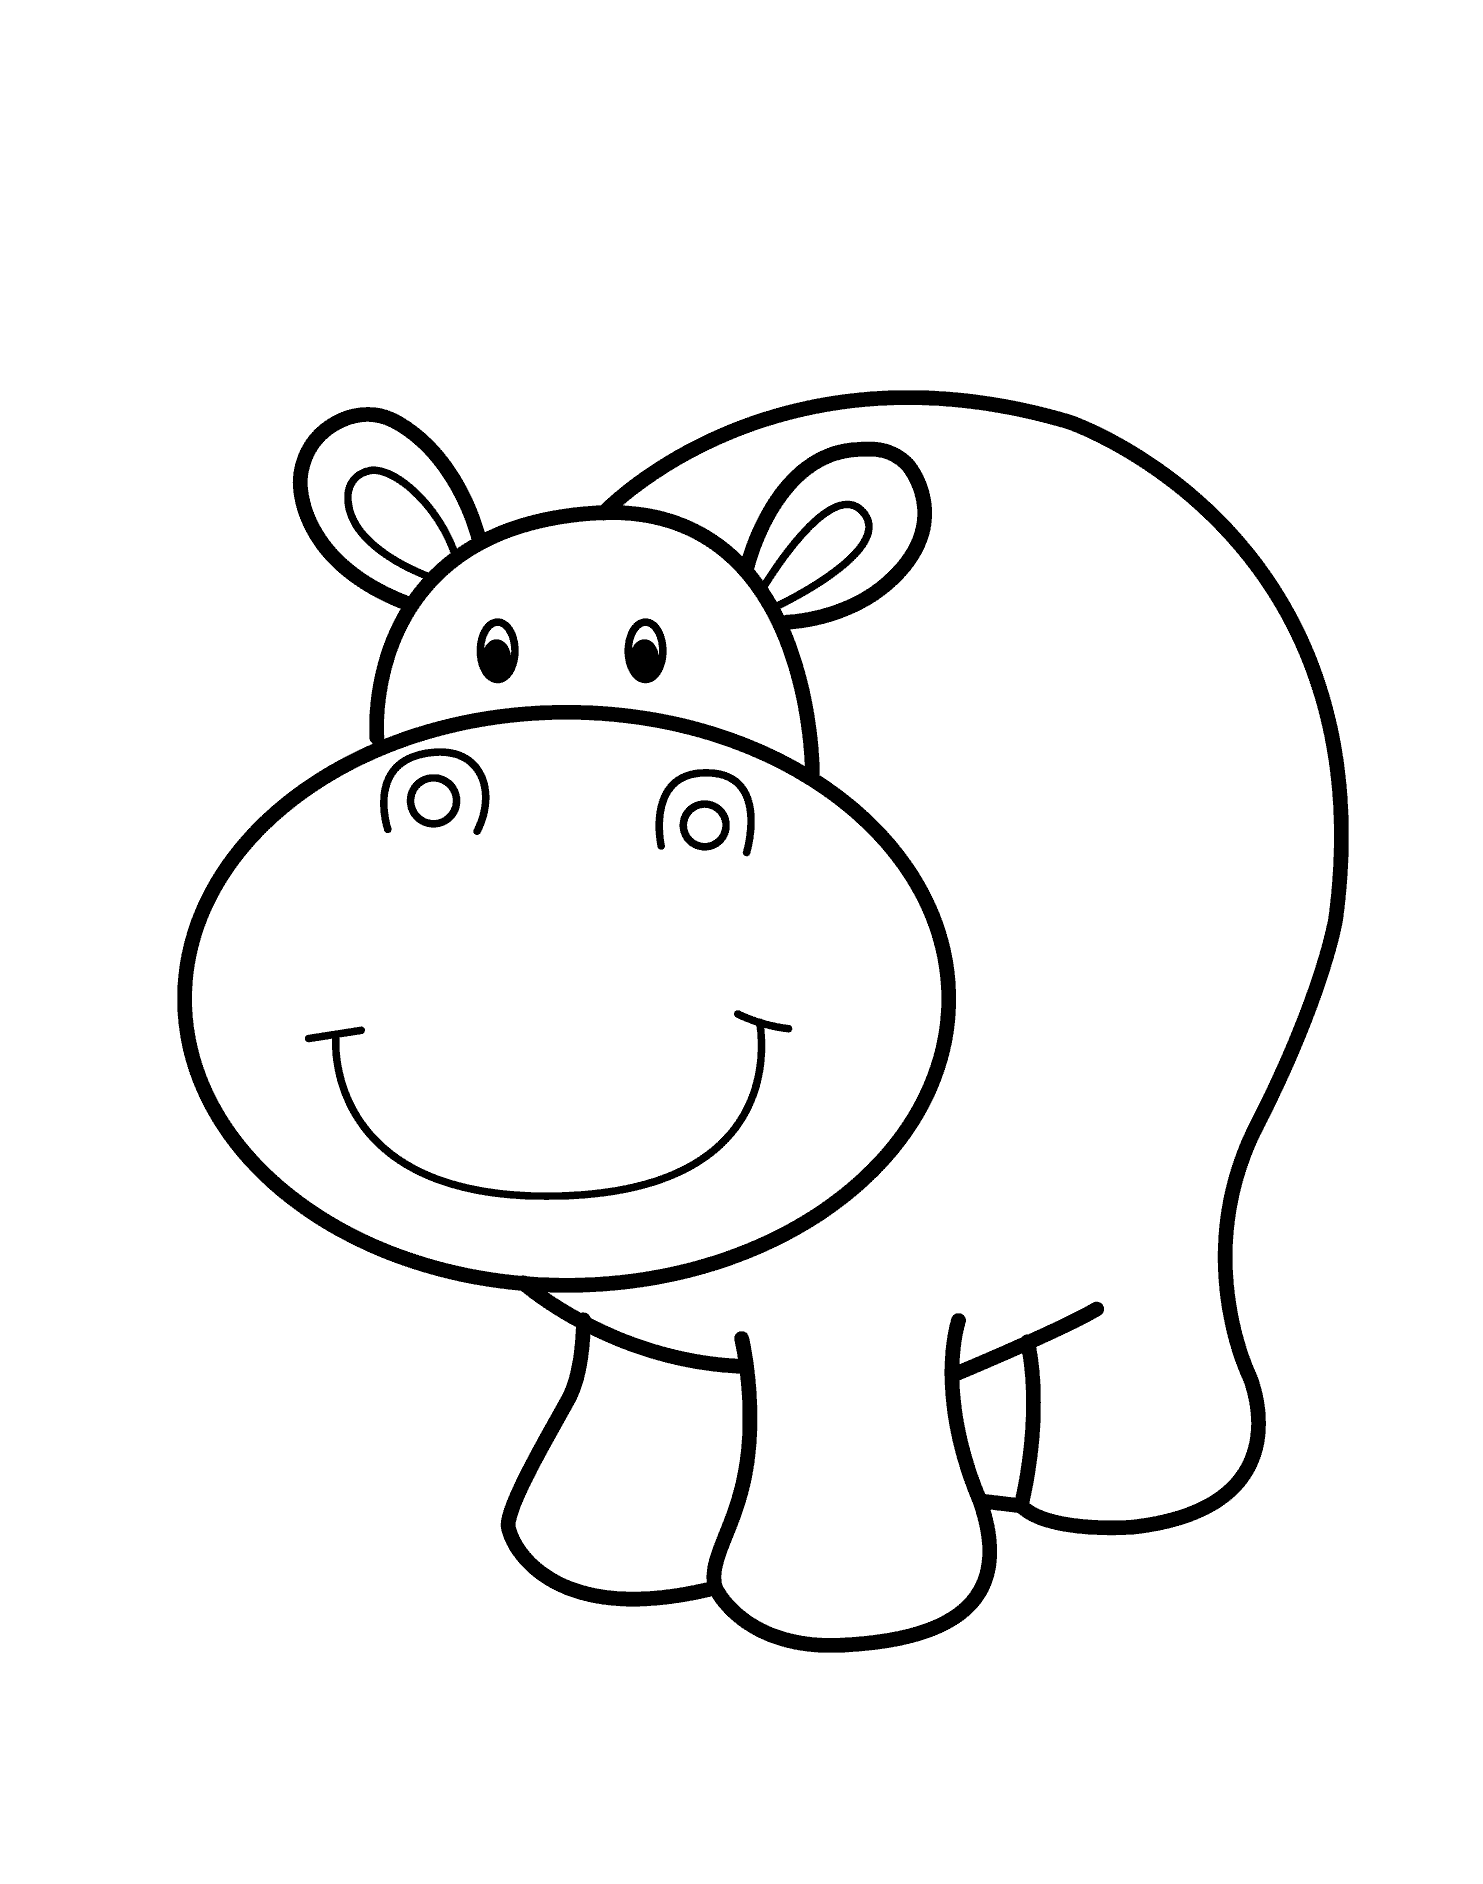 Printable Hippo Coloring Pages Pdf - Cute Hippo Coloring Pages